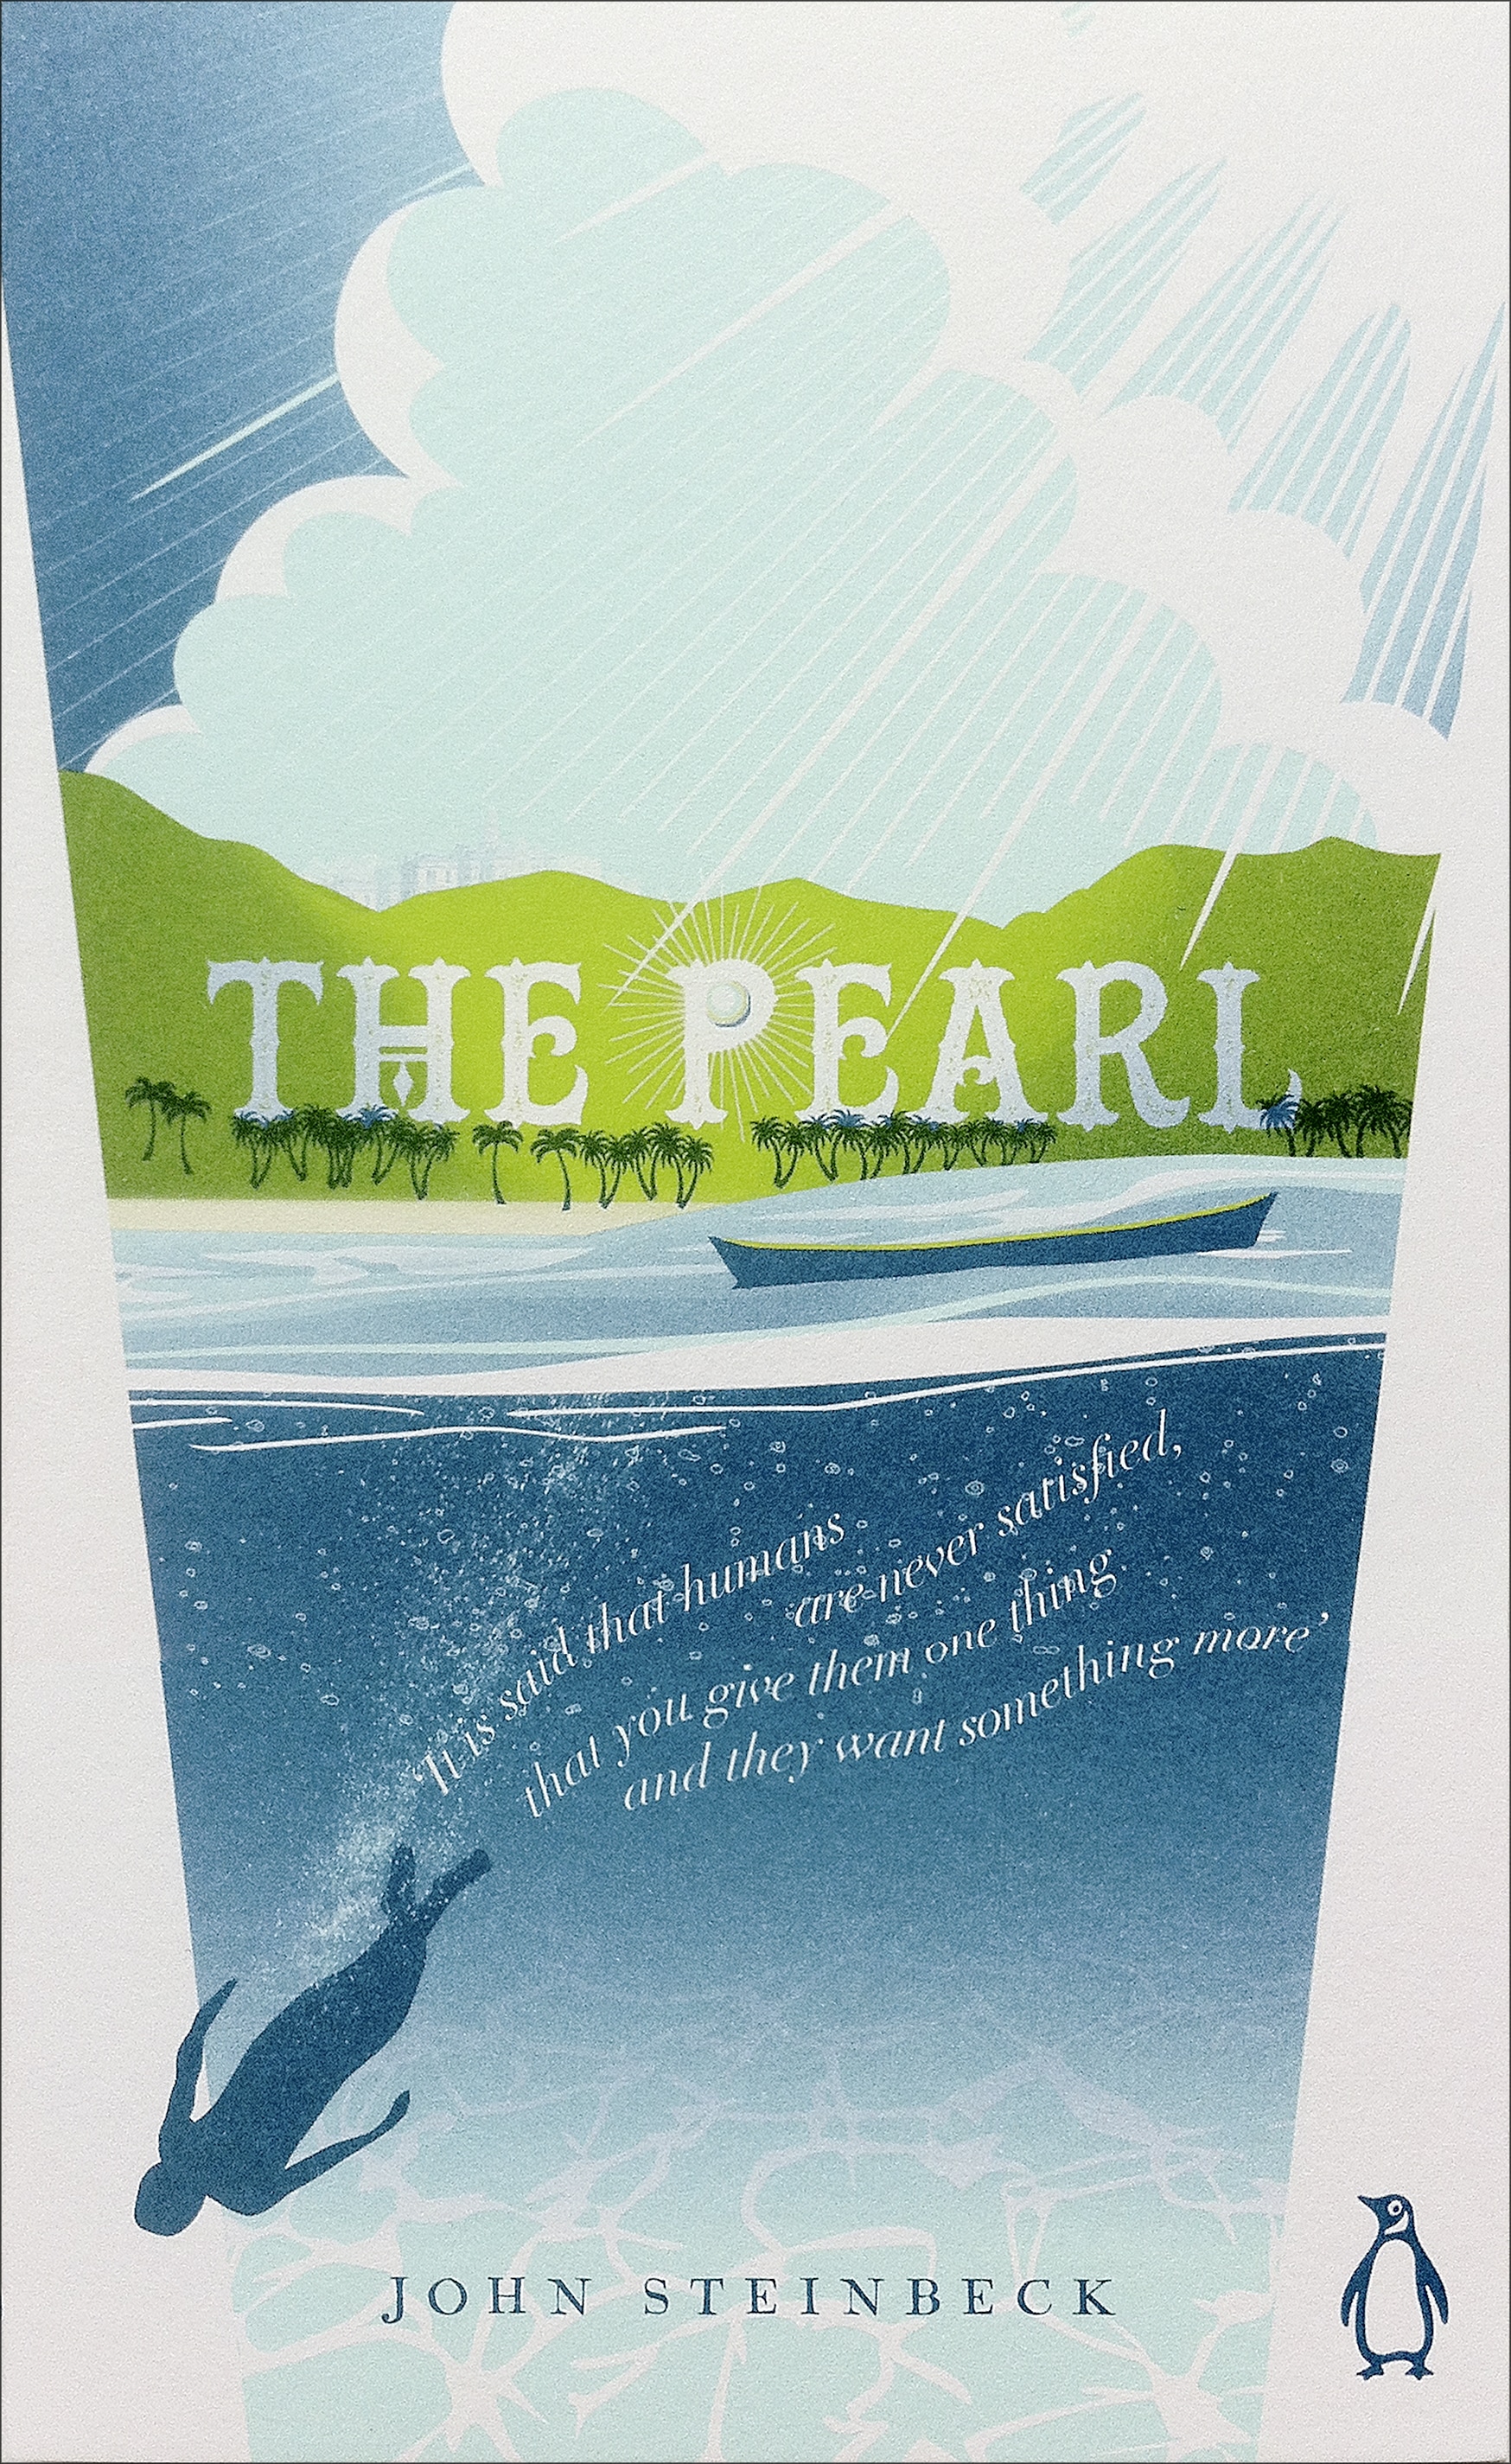 Book “The Pearl” by John Steinbeck, Linda Wagner-Martin — April 3, 2014